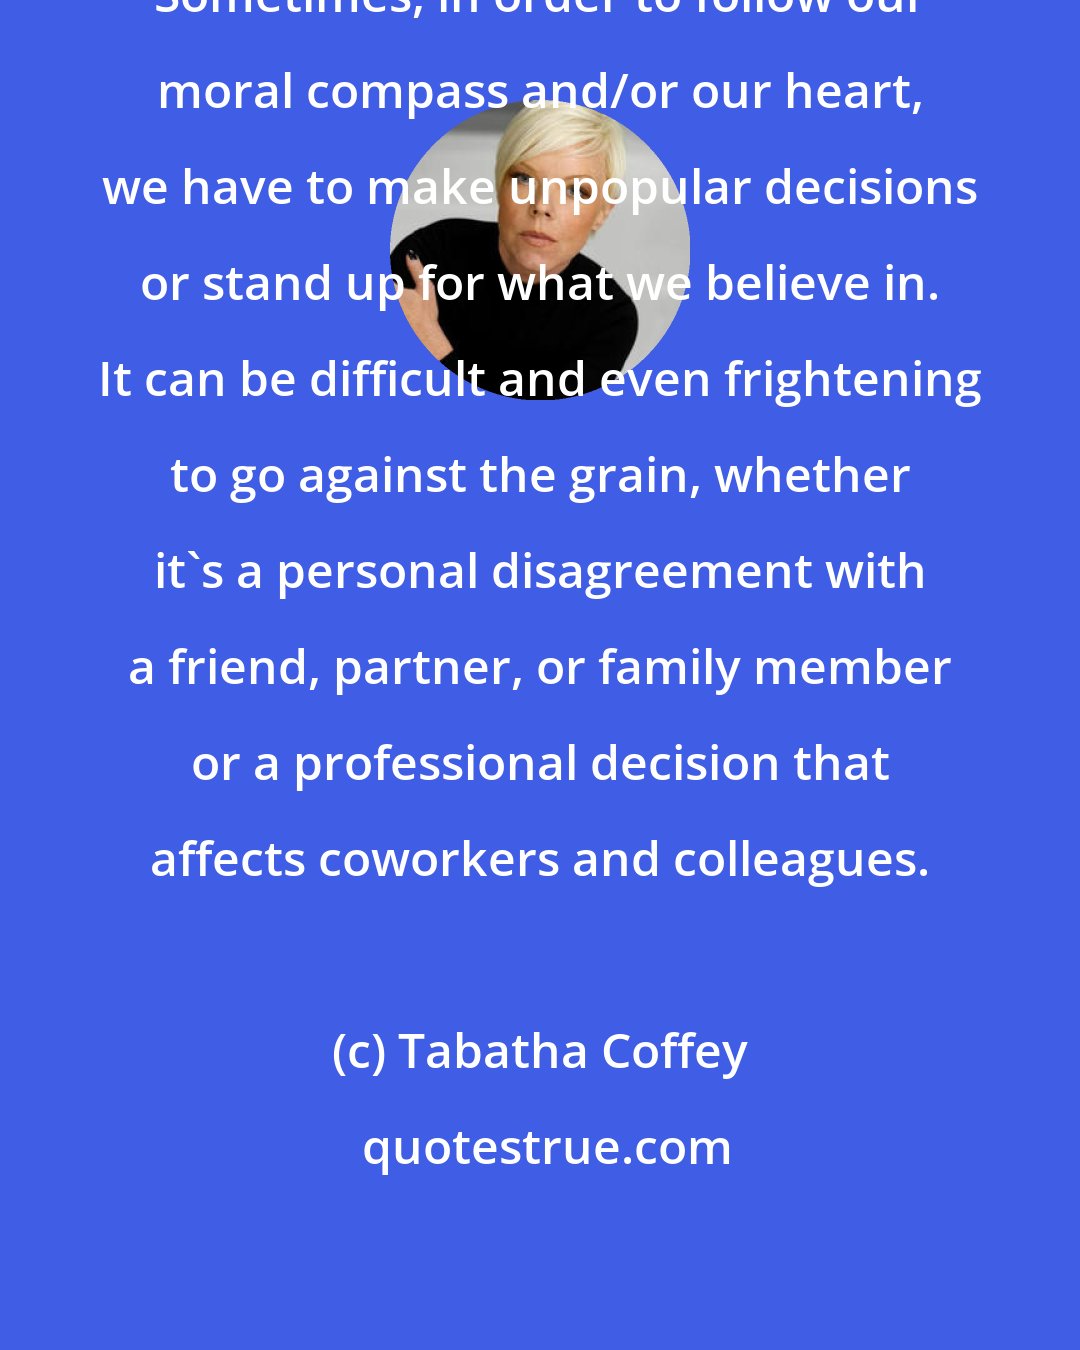 Tabatha Coffey: Sometimes, in order to follow our moral compass and/or our heart, we have to make unpopular decisions or stand up for what we believe in. It can be difficult and even frightening to go against the grain, whether it's a personal disagreement with a friend, partner, or family member or a professional decision that affects coworkers and colleagues.